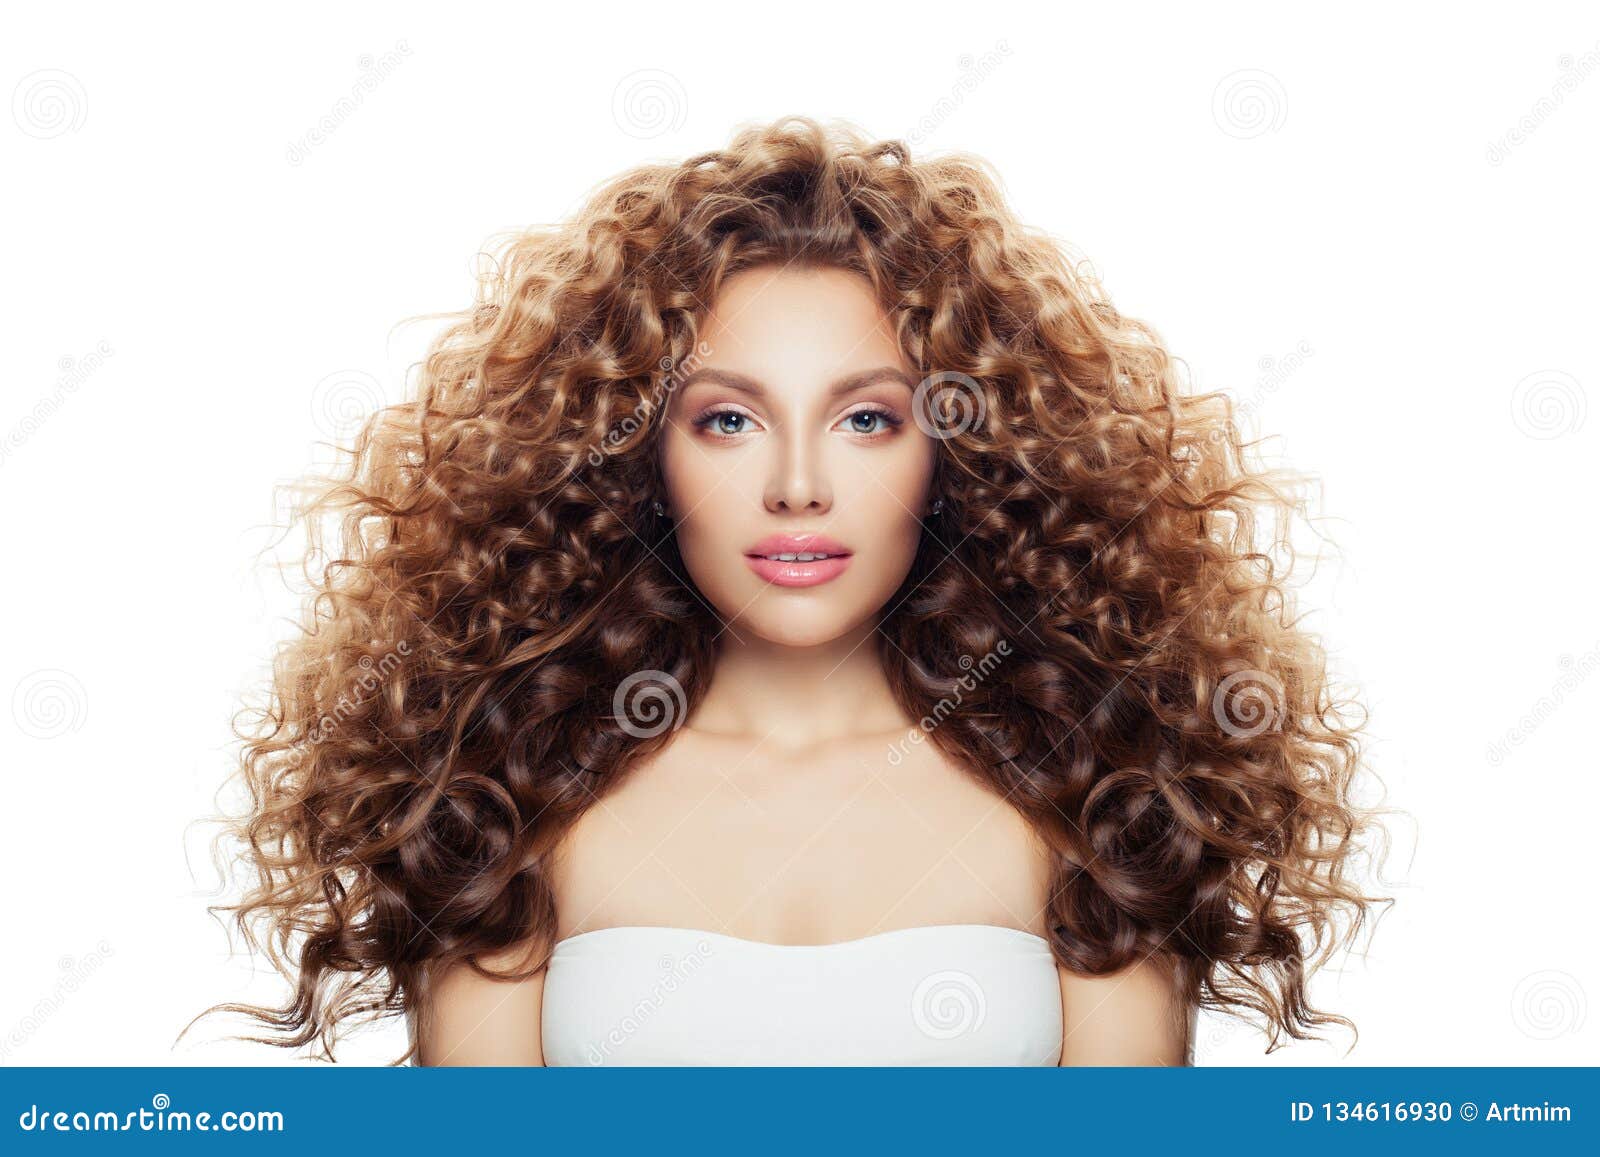 Beautiful Woman With Long Healthy Curly Hair Isolated On